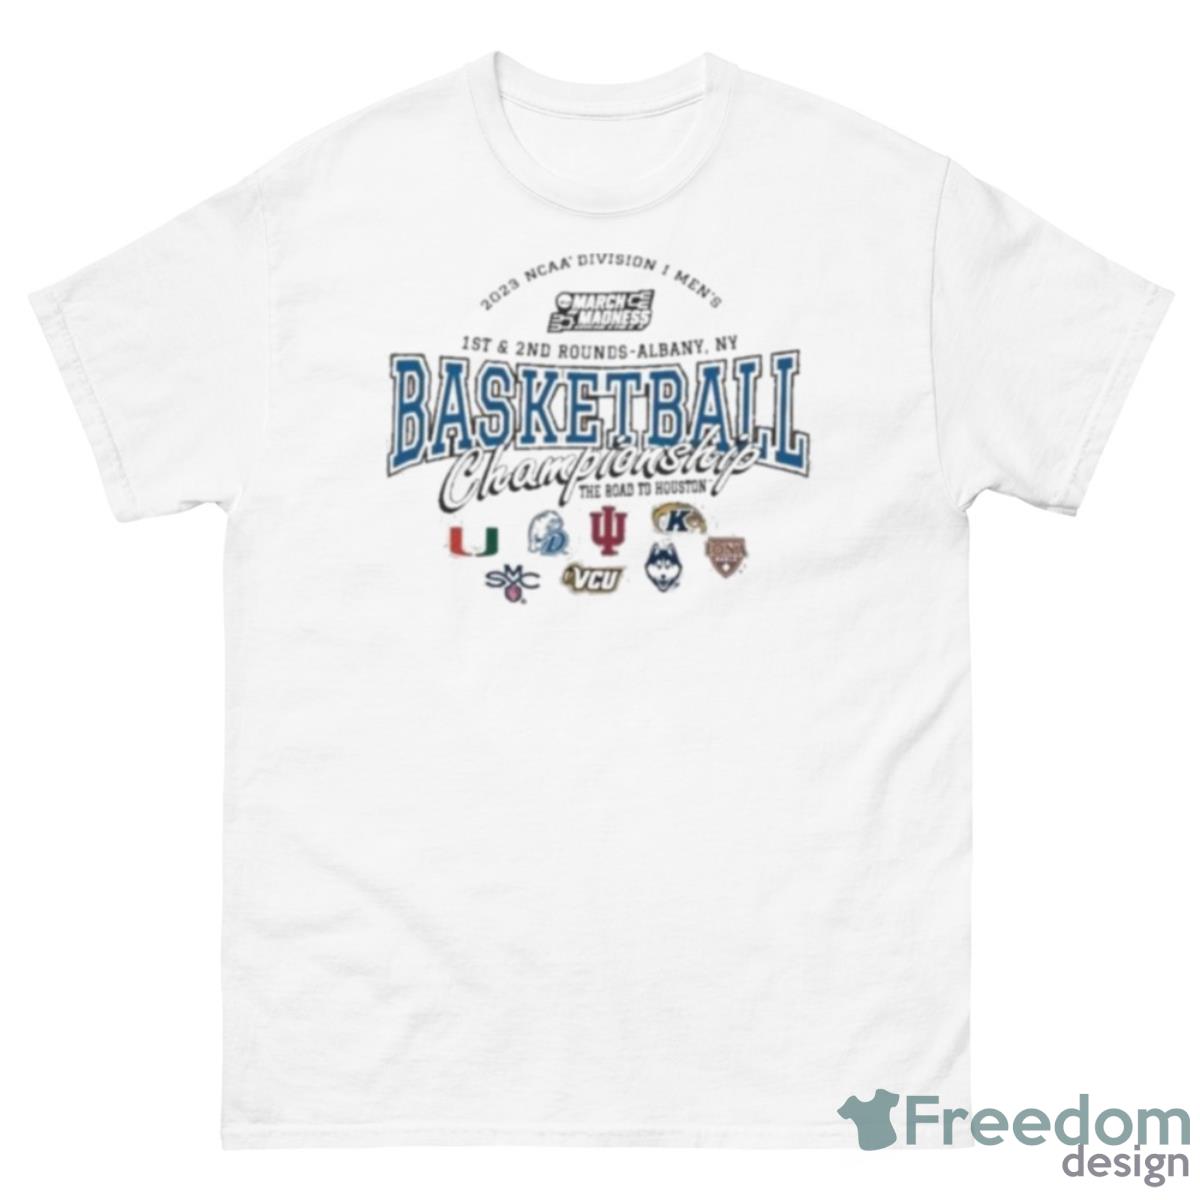 2023 NCAA Division I Men’s Basketball 1st & 2nd Rounds Albany The Road To Houston Shirt - 500 Men’s Classic Tee Gildan